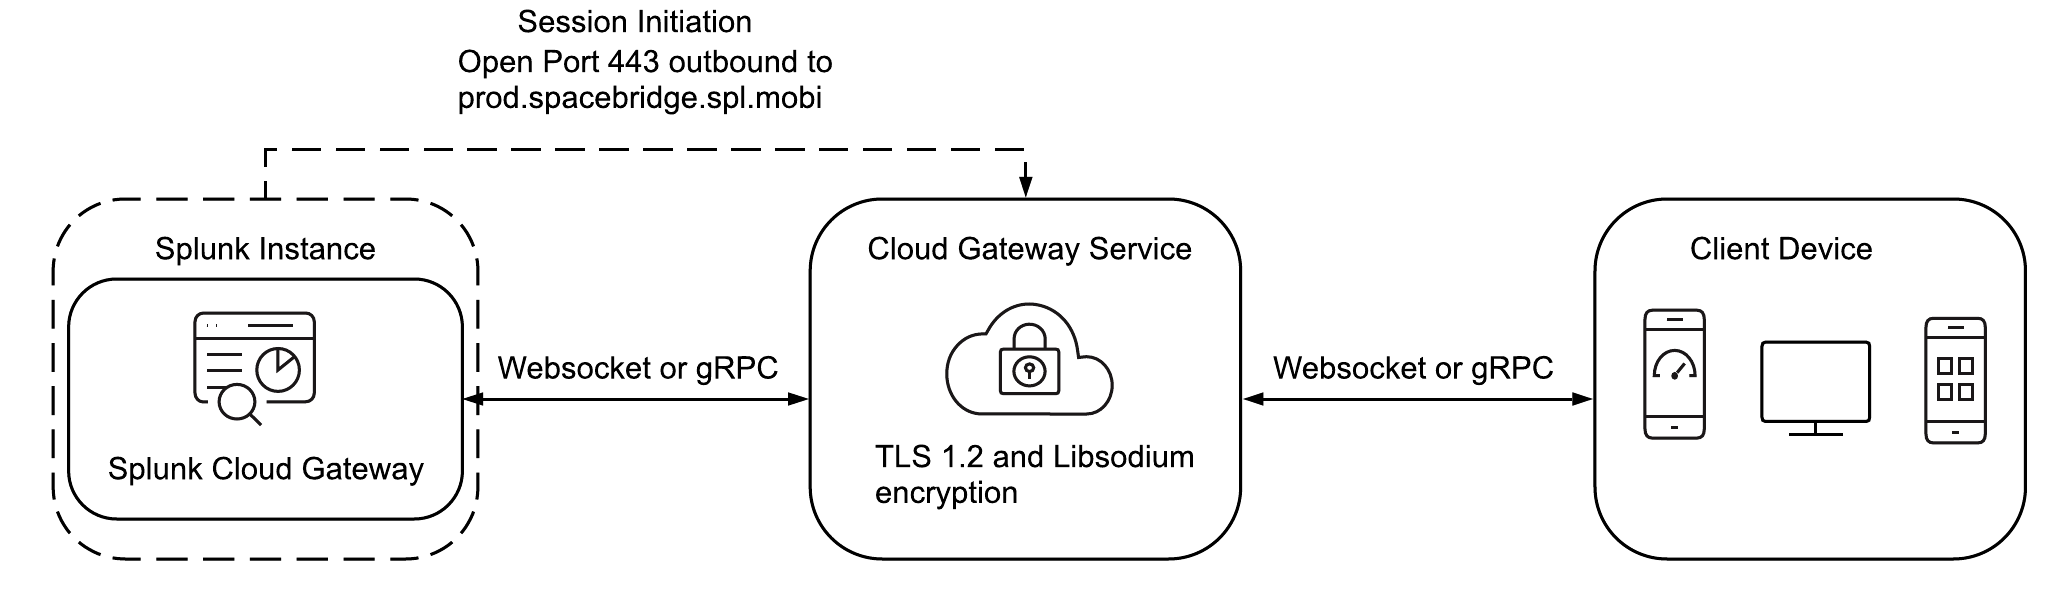 This diagram shows the bidirectional communication between mobile devices and the Splunk Cloud Gateway app, with the Cloud Gateway service in between as an intermediary message router.